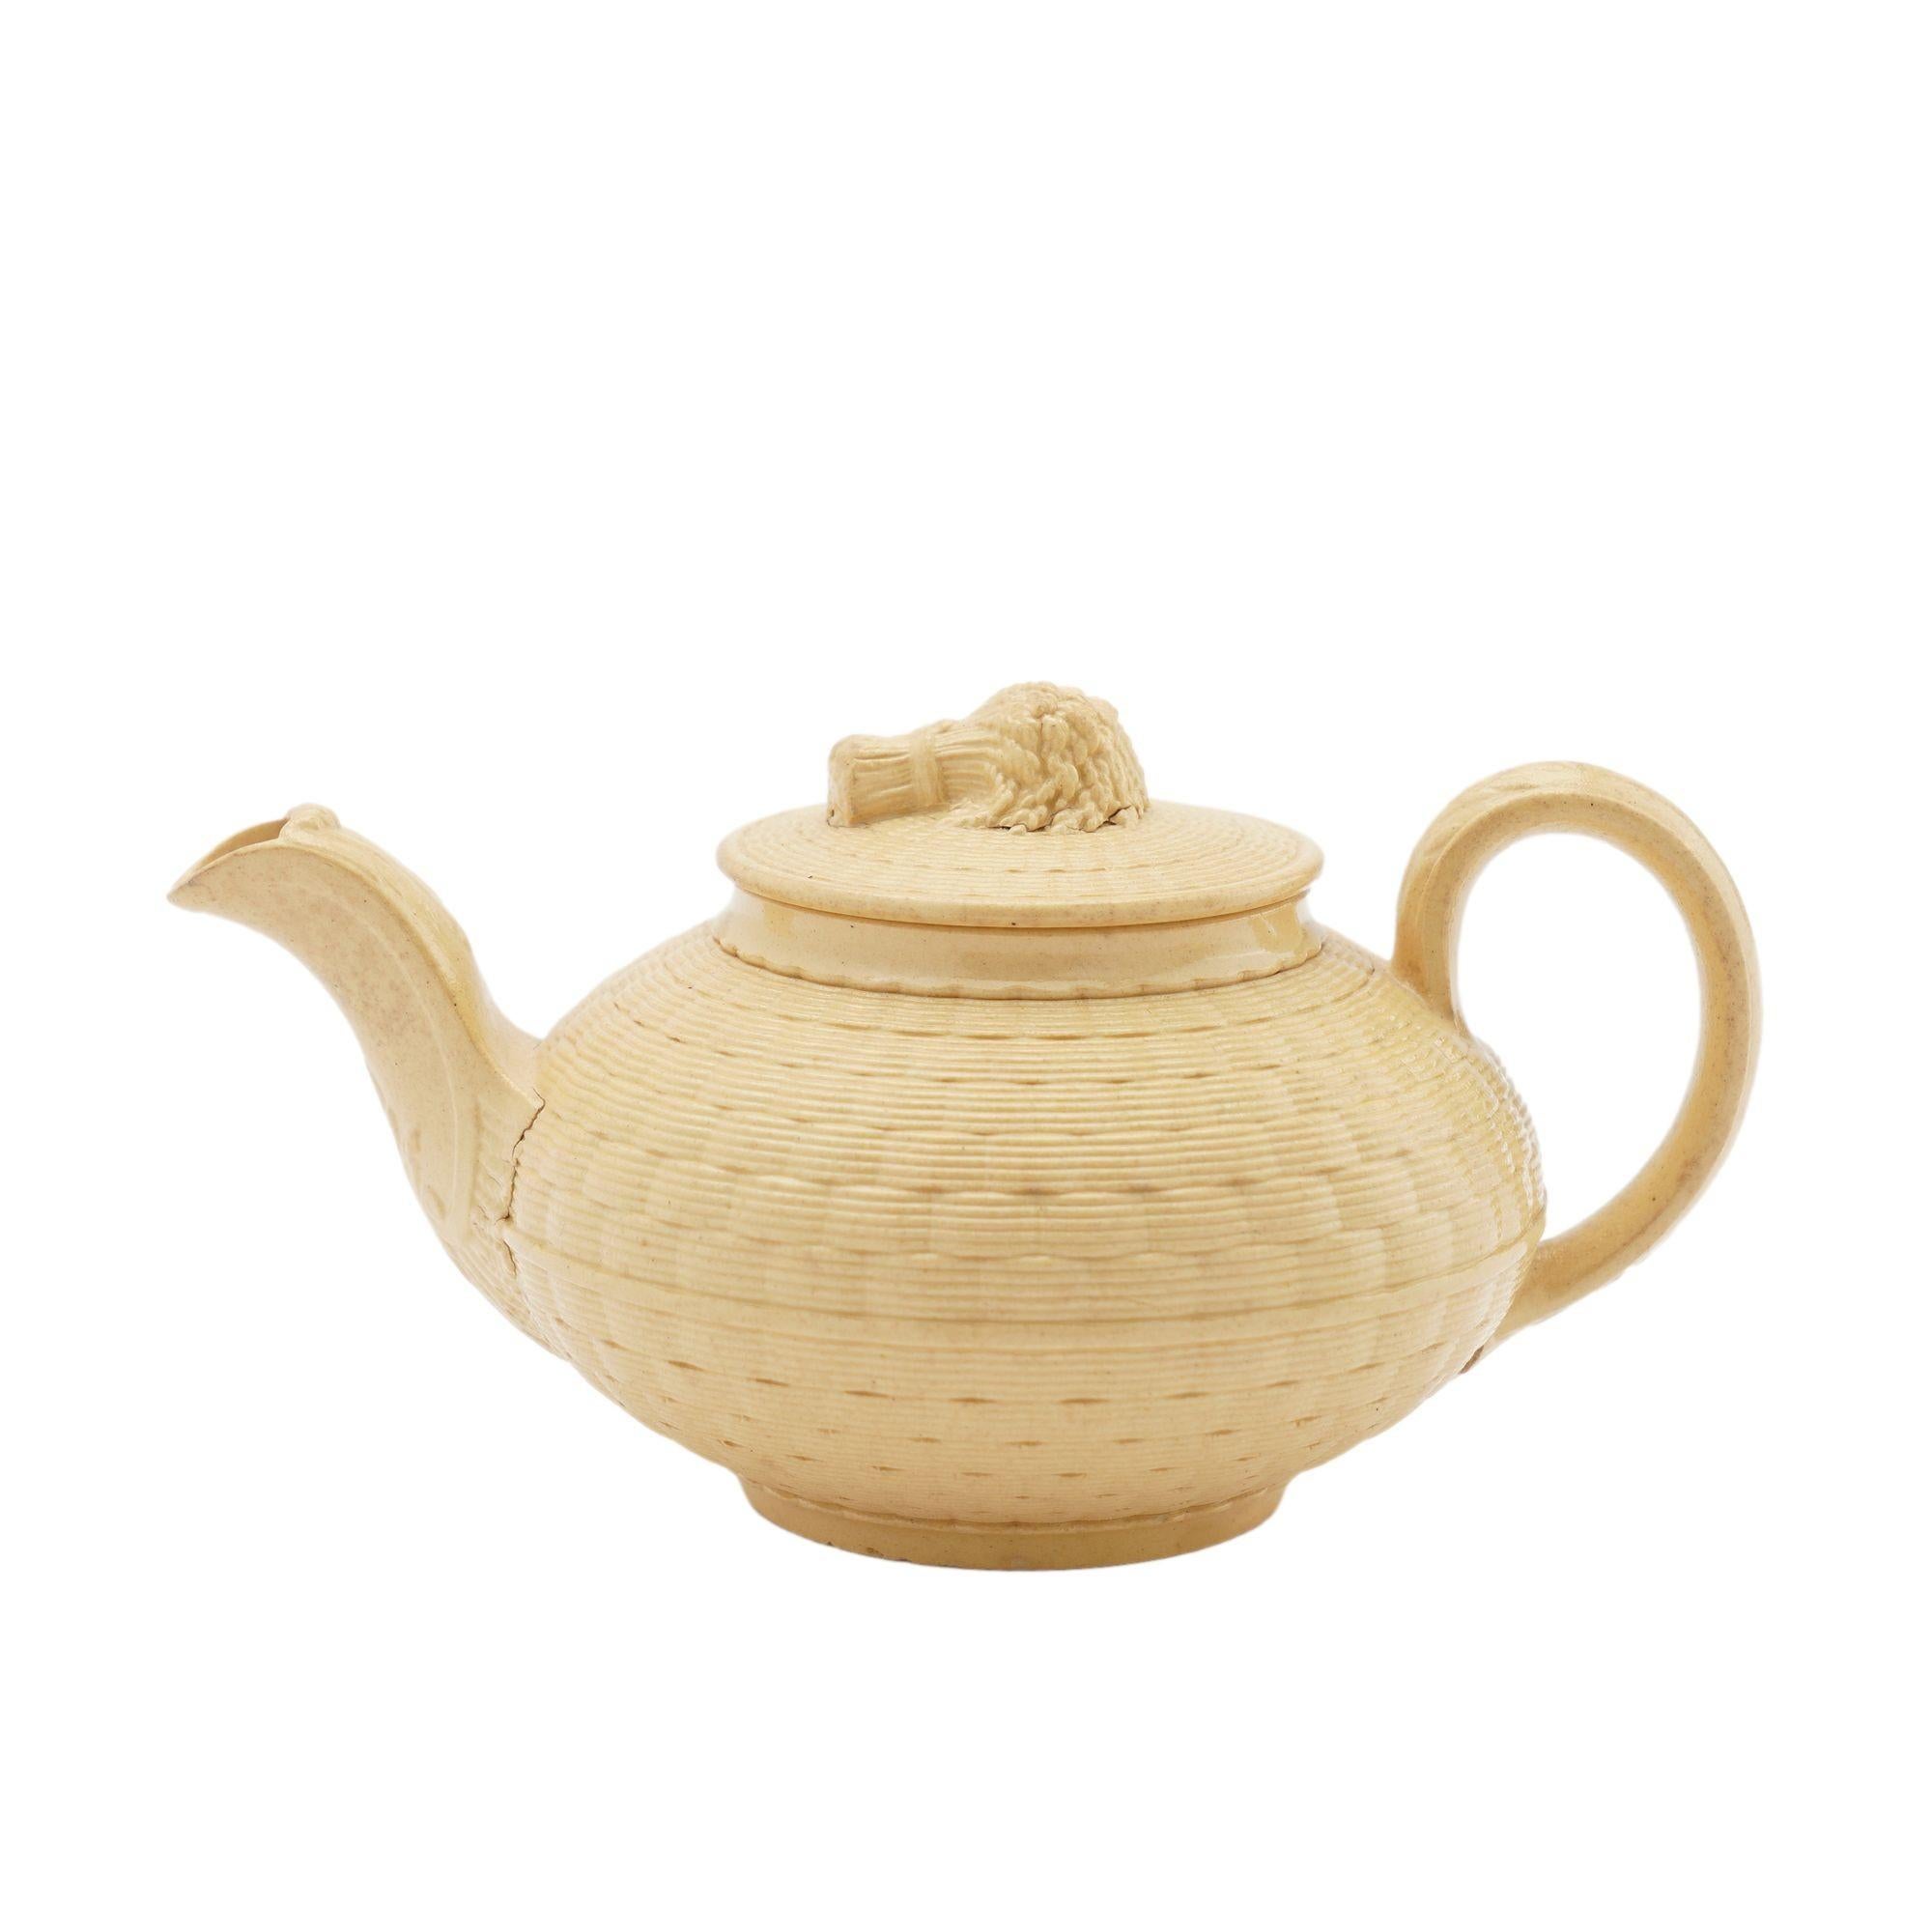 19th Century Caneware creamer and teapot by Wedgwood, c. 1817 For Sale